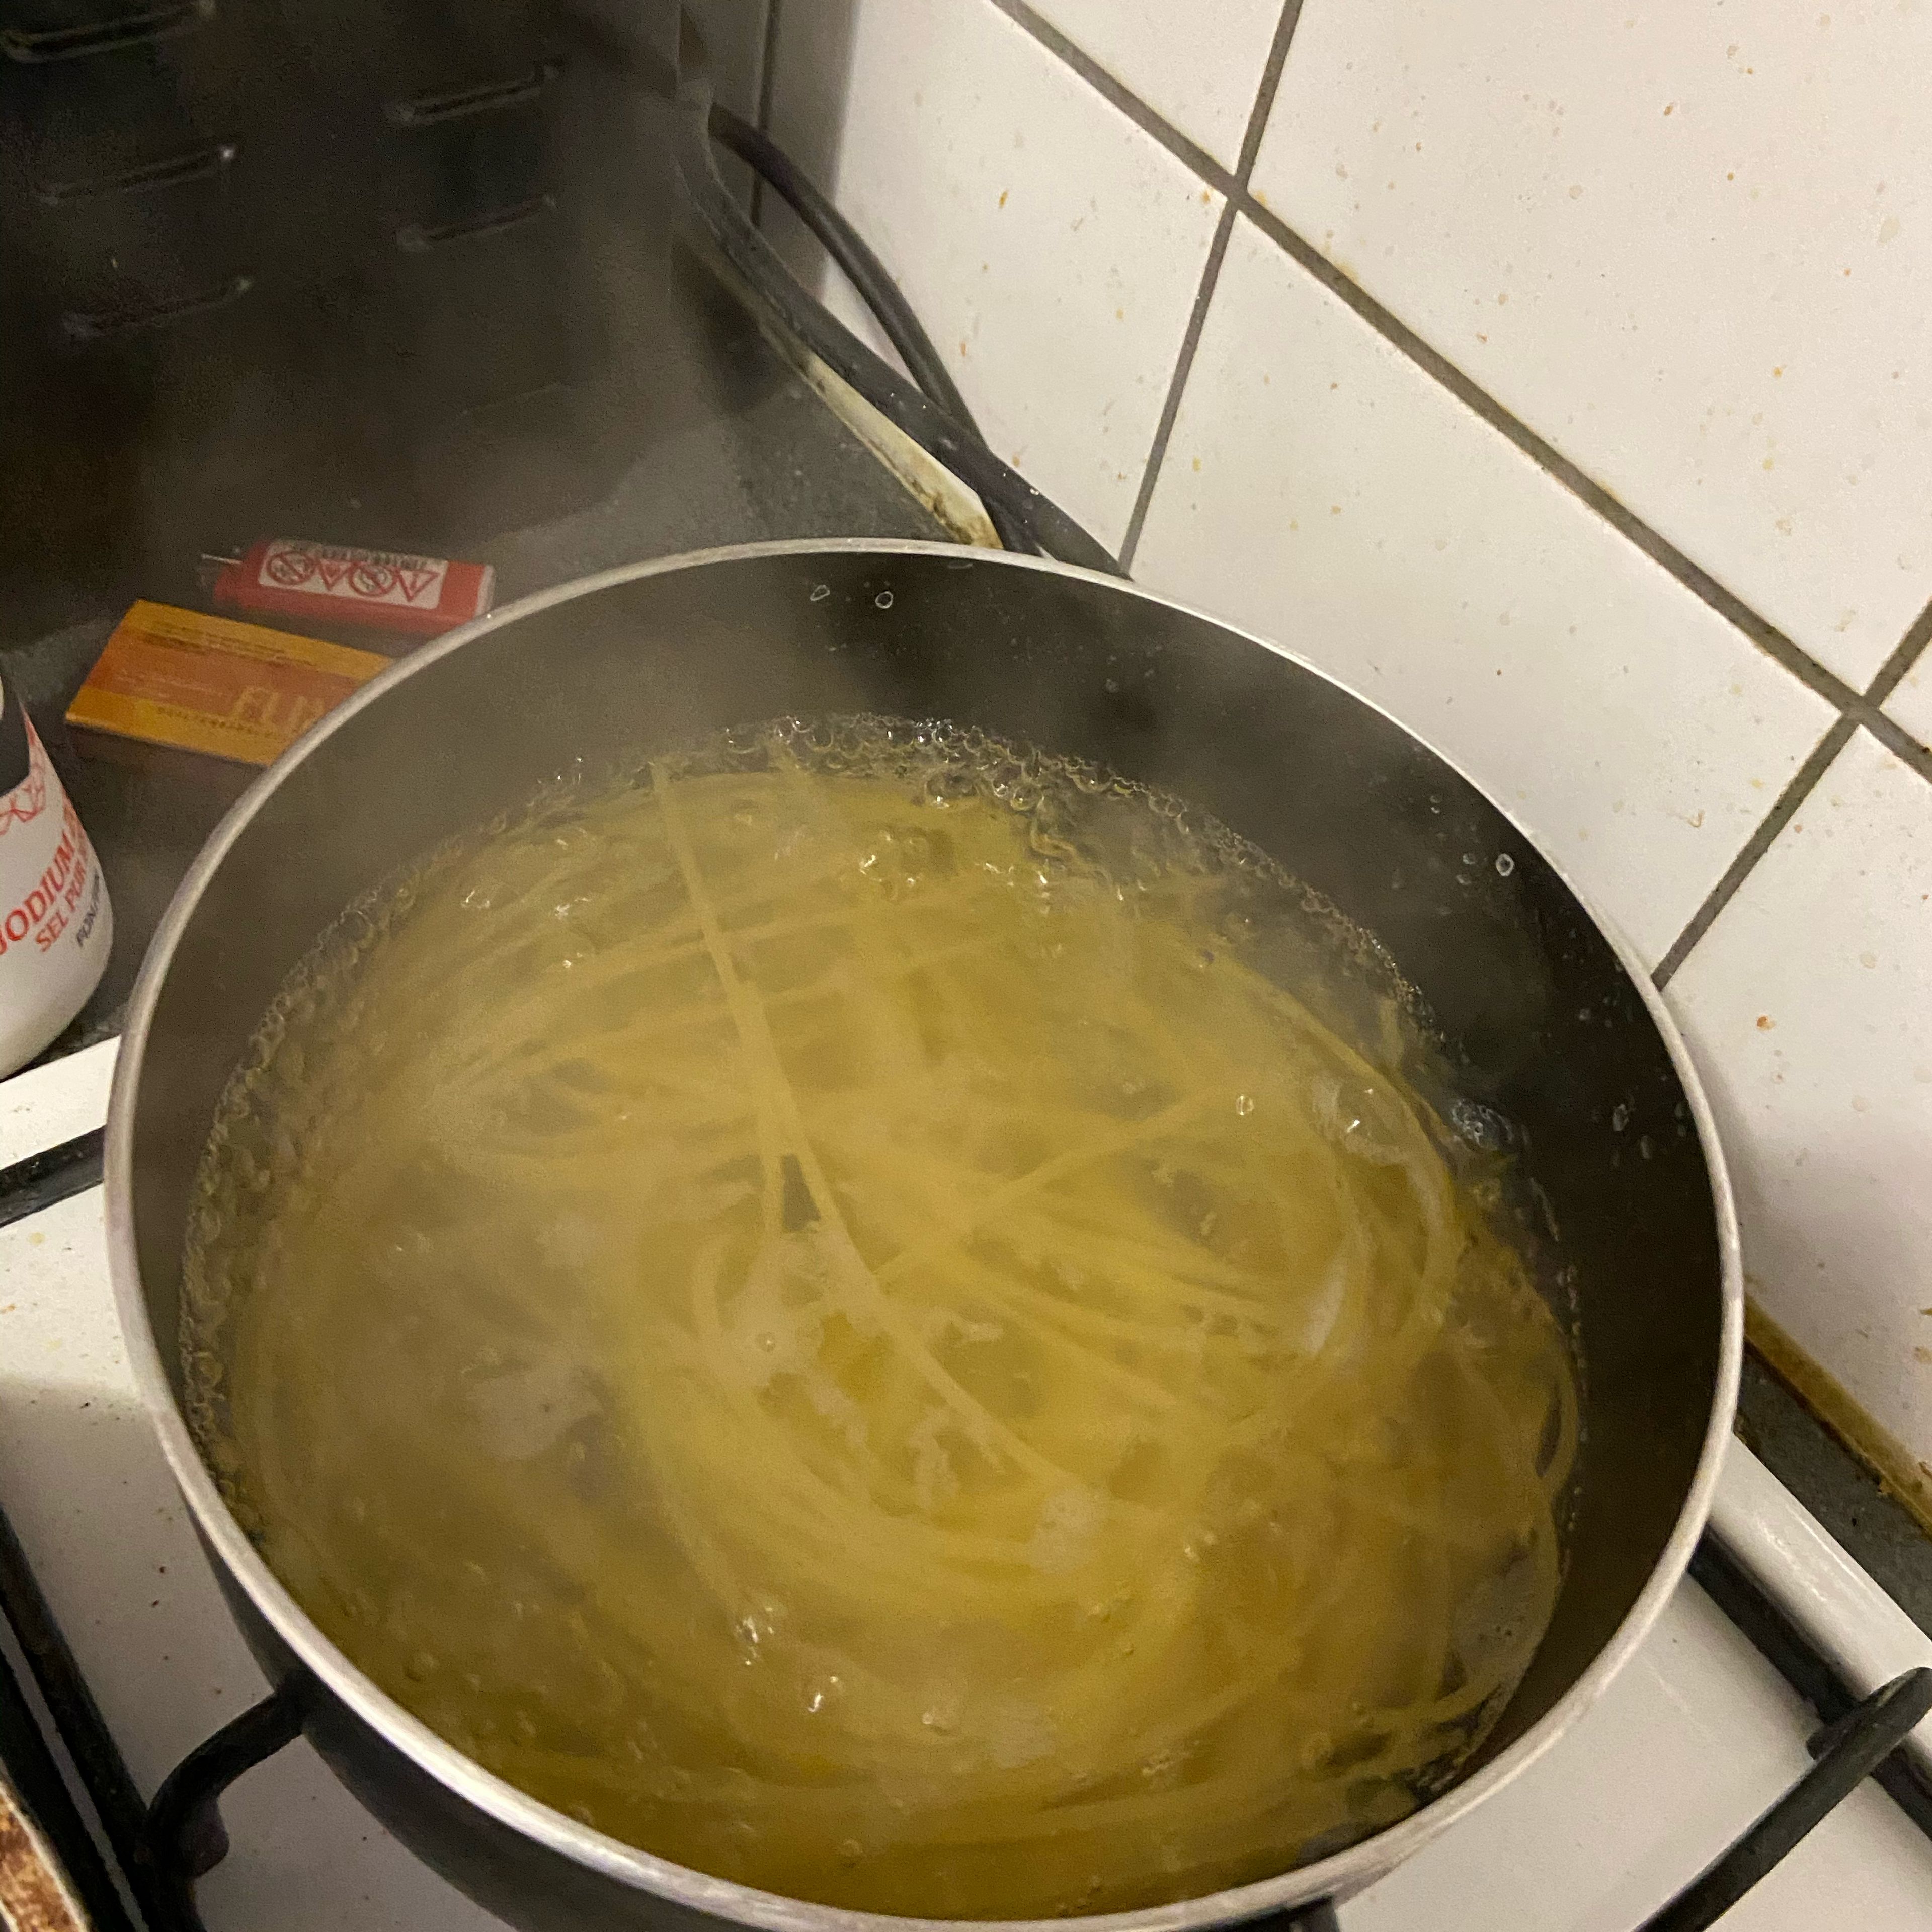 Add your pasta in boiling water along with salt